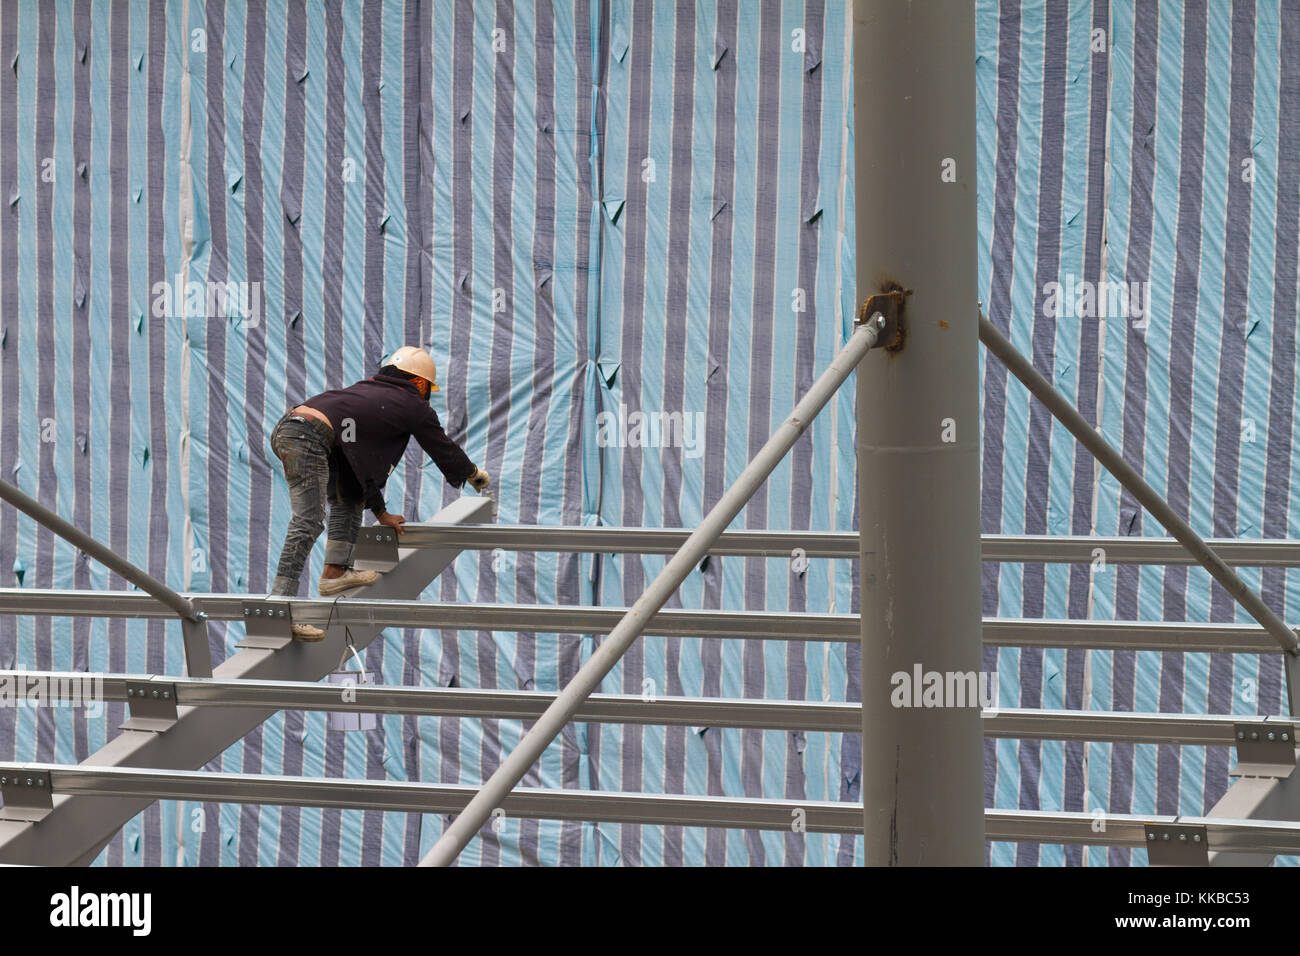 Workers on a building workplace in Kuala Lumpur, Malaysia Stock Photo